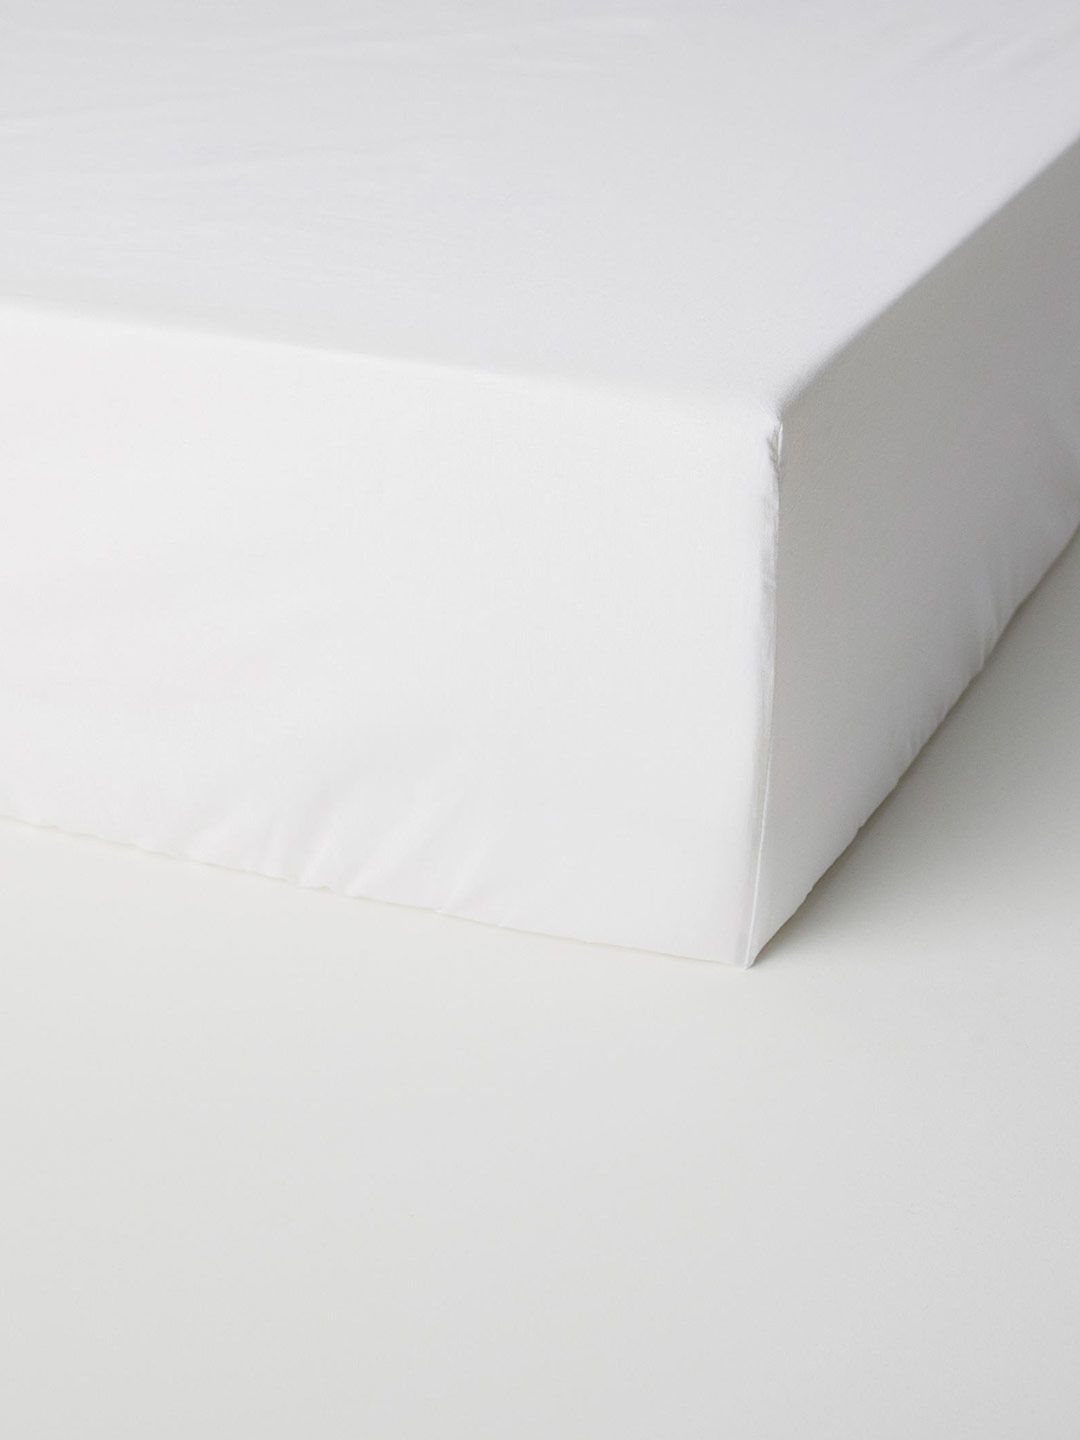 H&M White Solid Fitted Cotton Sheet Price in India